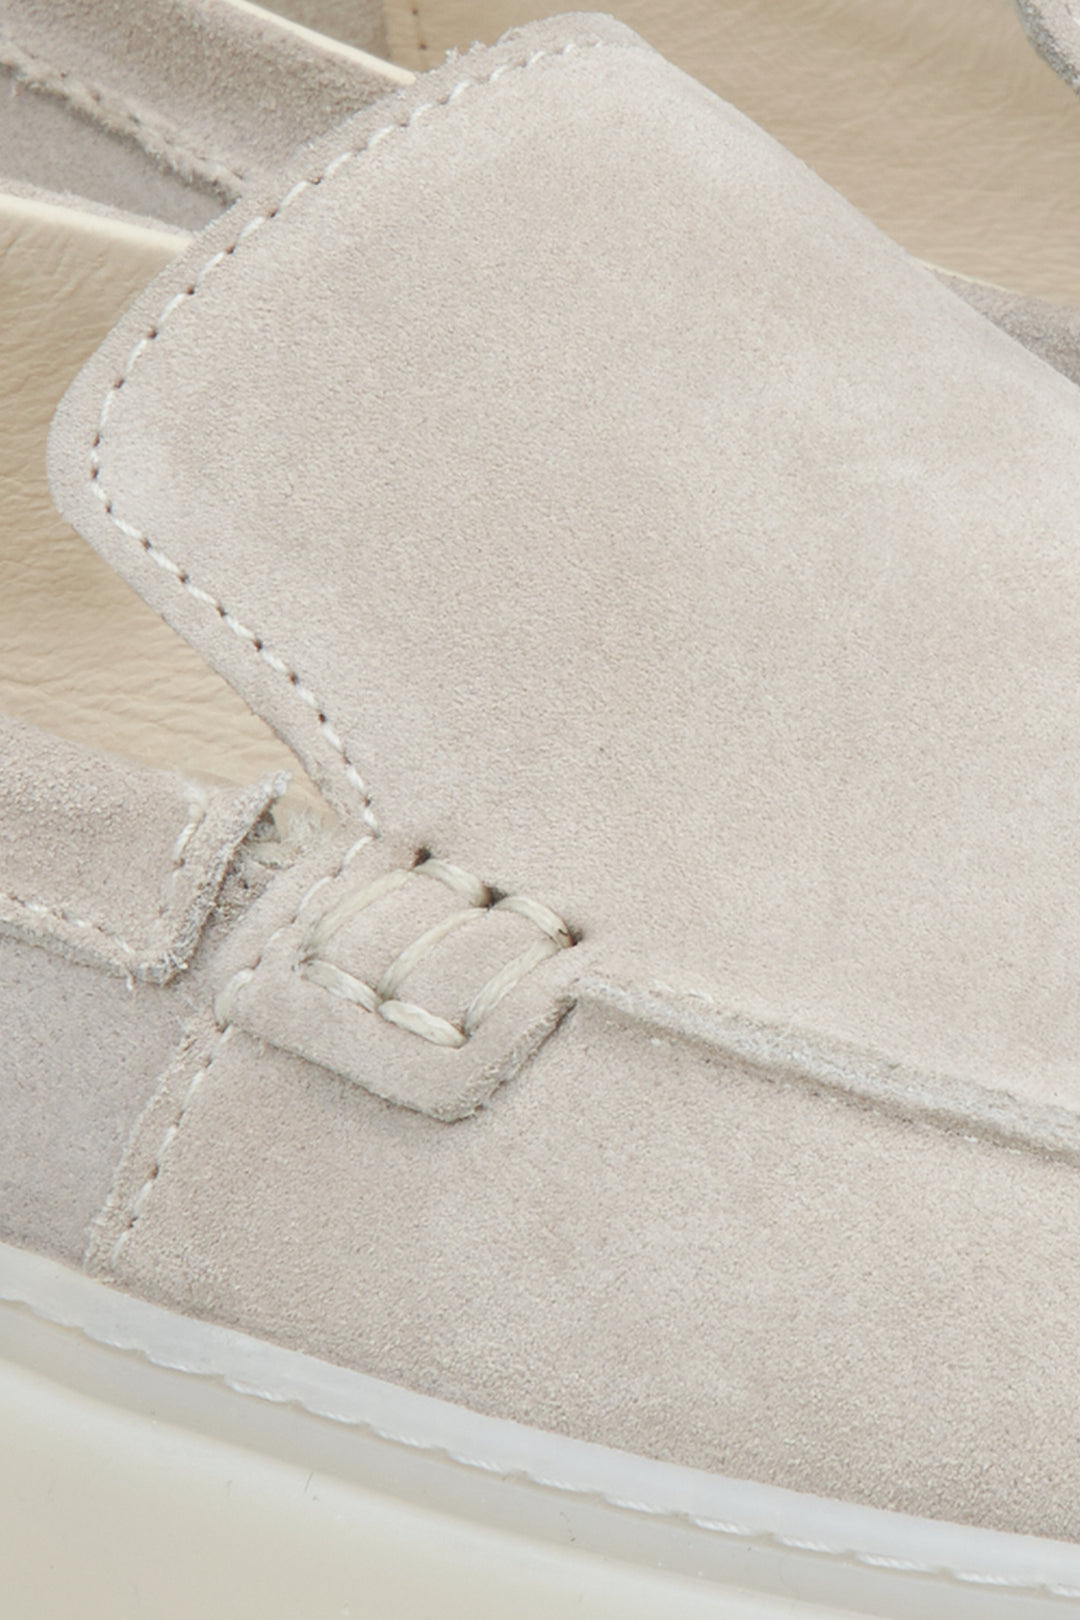 Light beige velour women's loafers - a close-up on details.